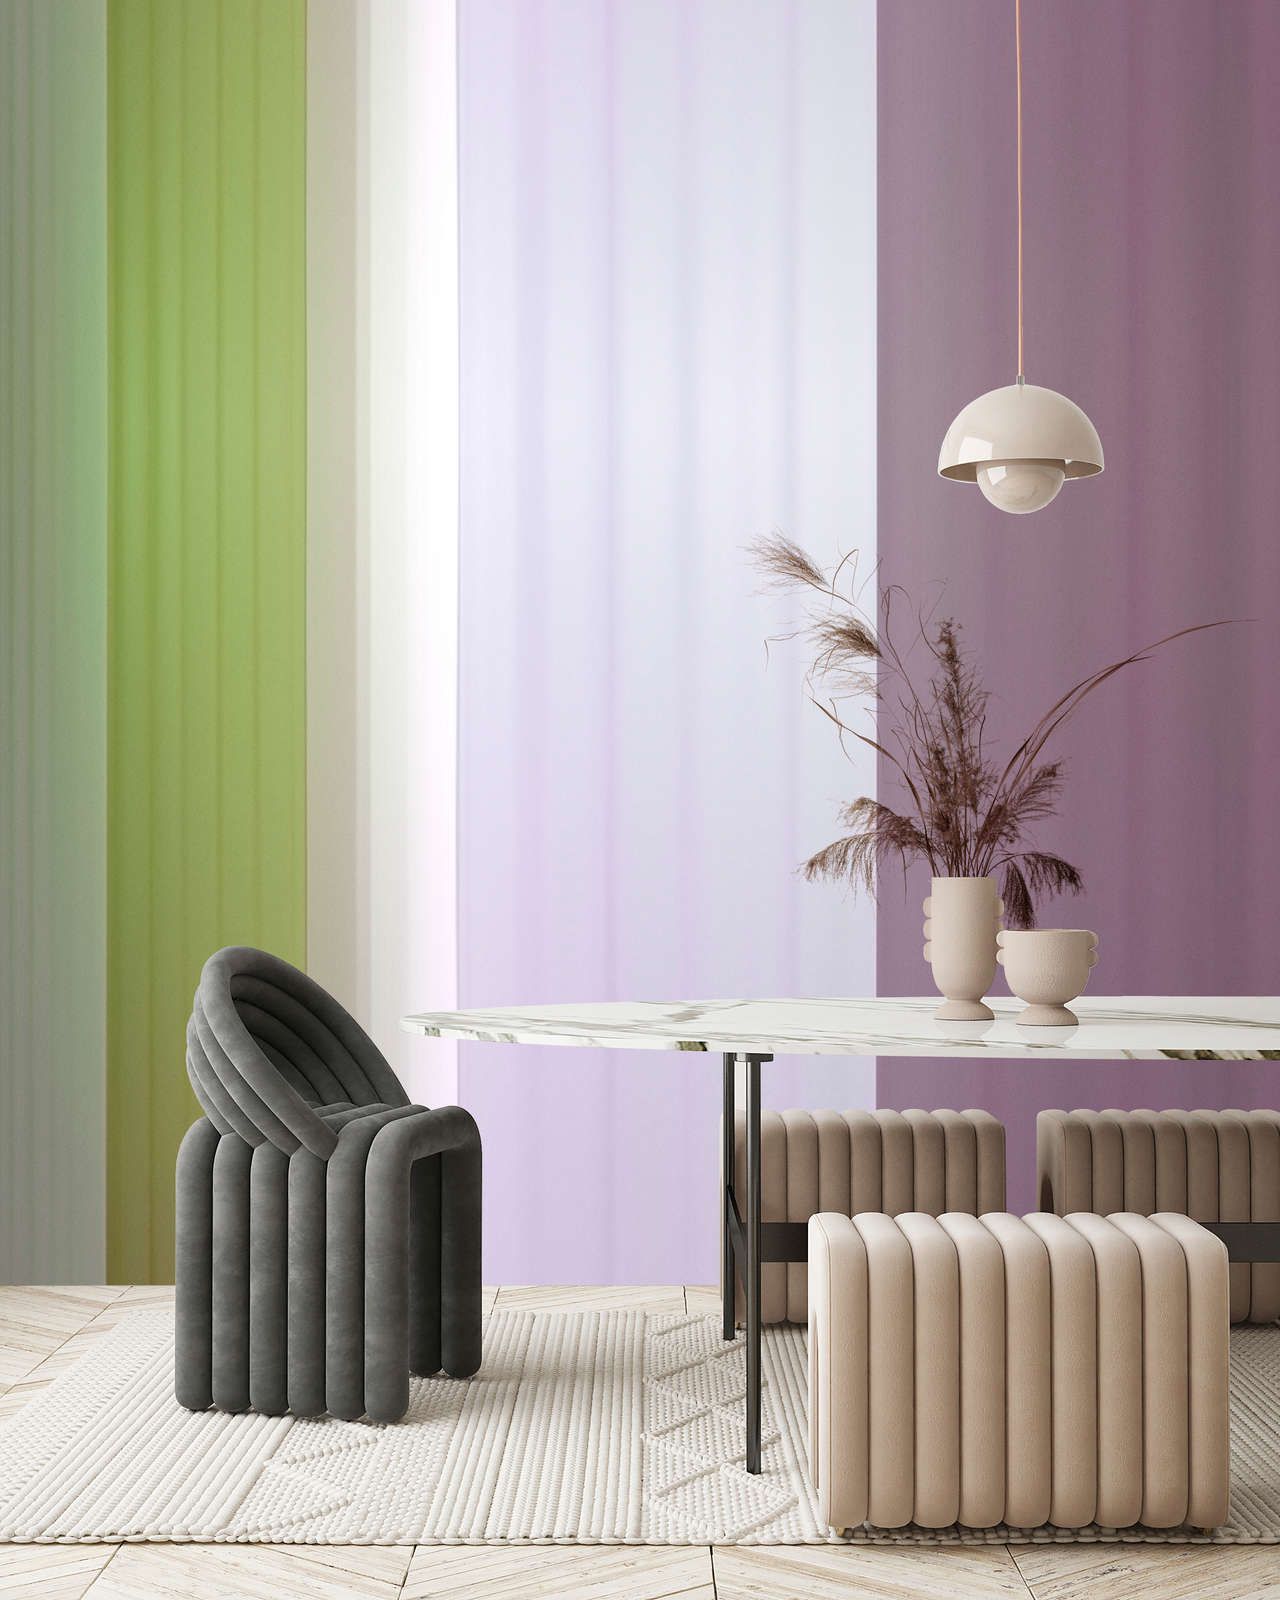             Photo wallpaper »co-coloures 3« - Colour gradient with stripes - green, lilac, purple | Smooth, slightly shiny premium non-woven fabric
        